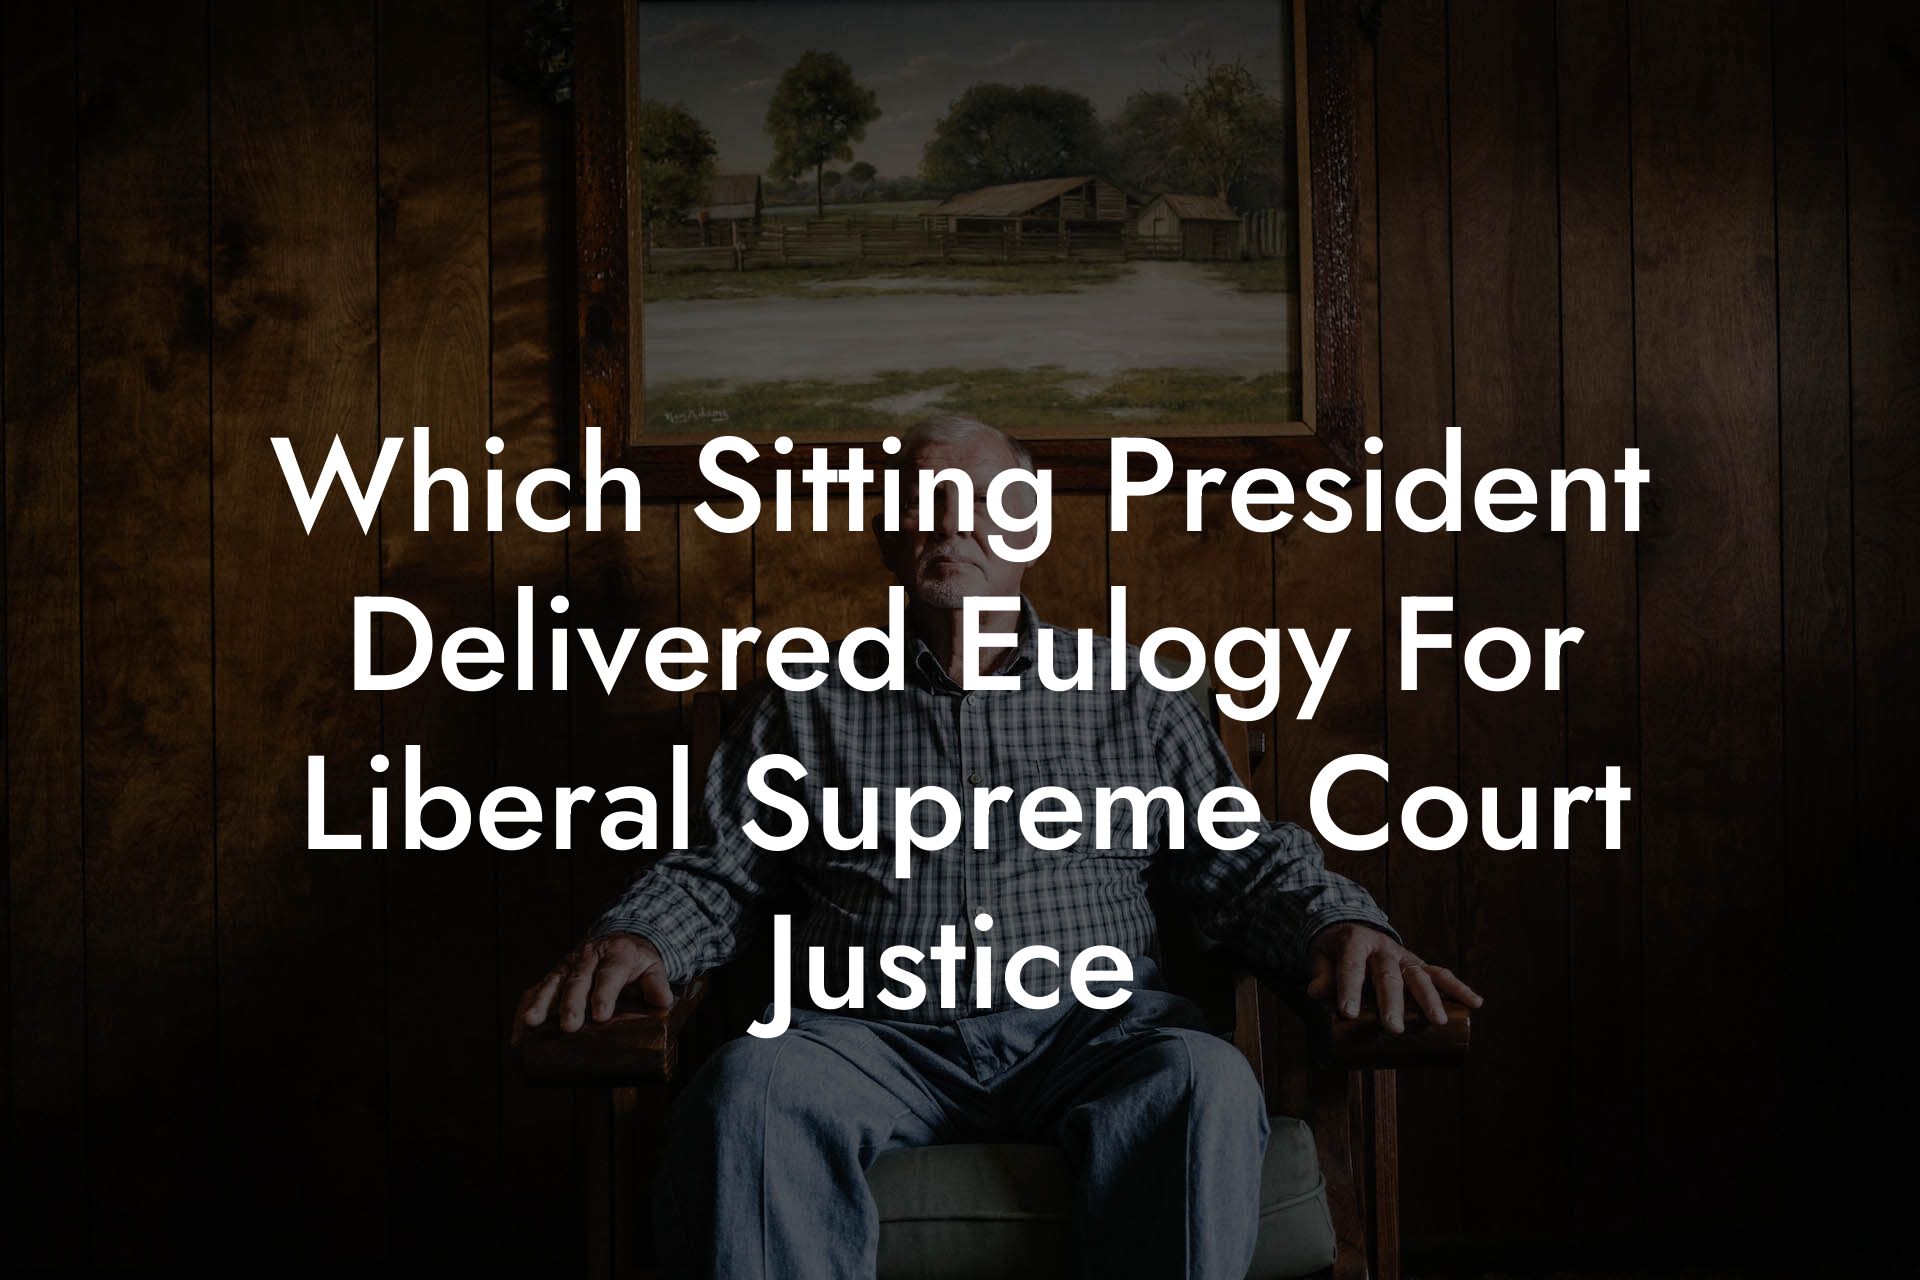 Which Sitting President Delivered Eulogy For Liberal Supreme Court Justice